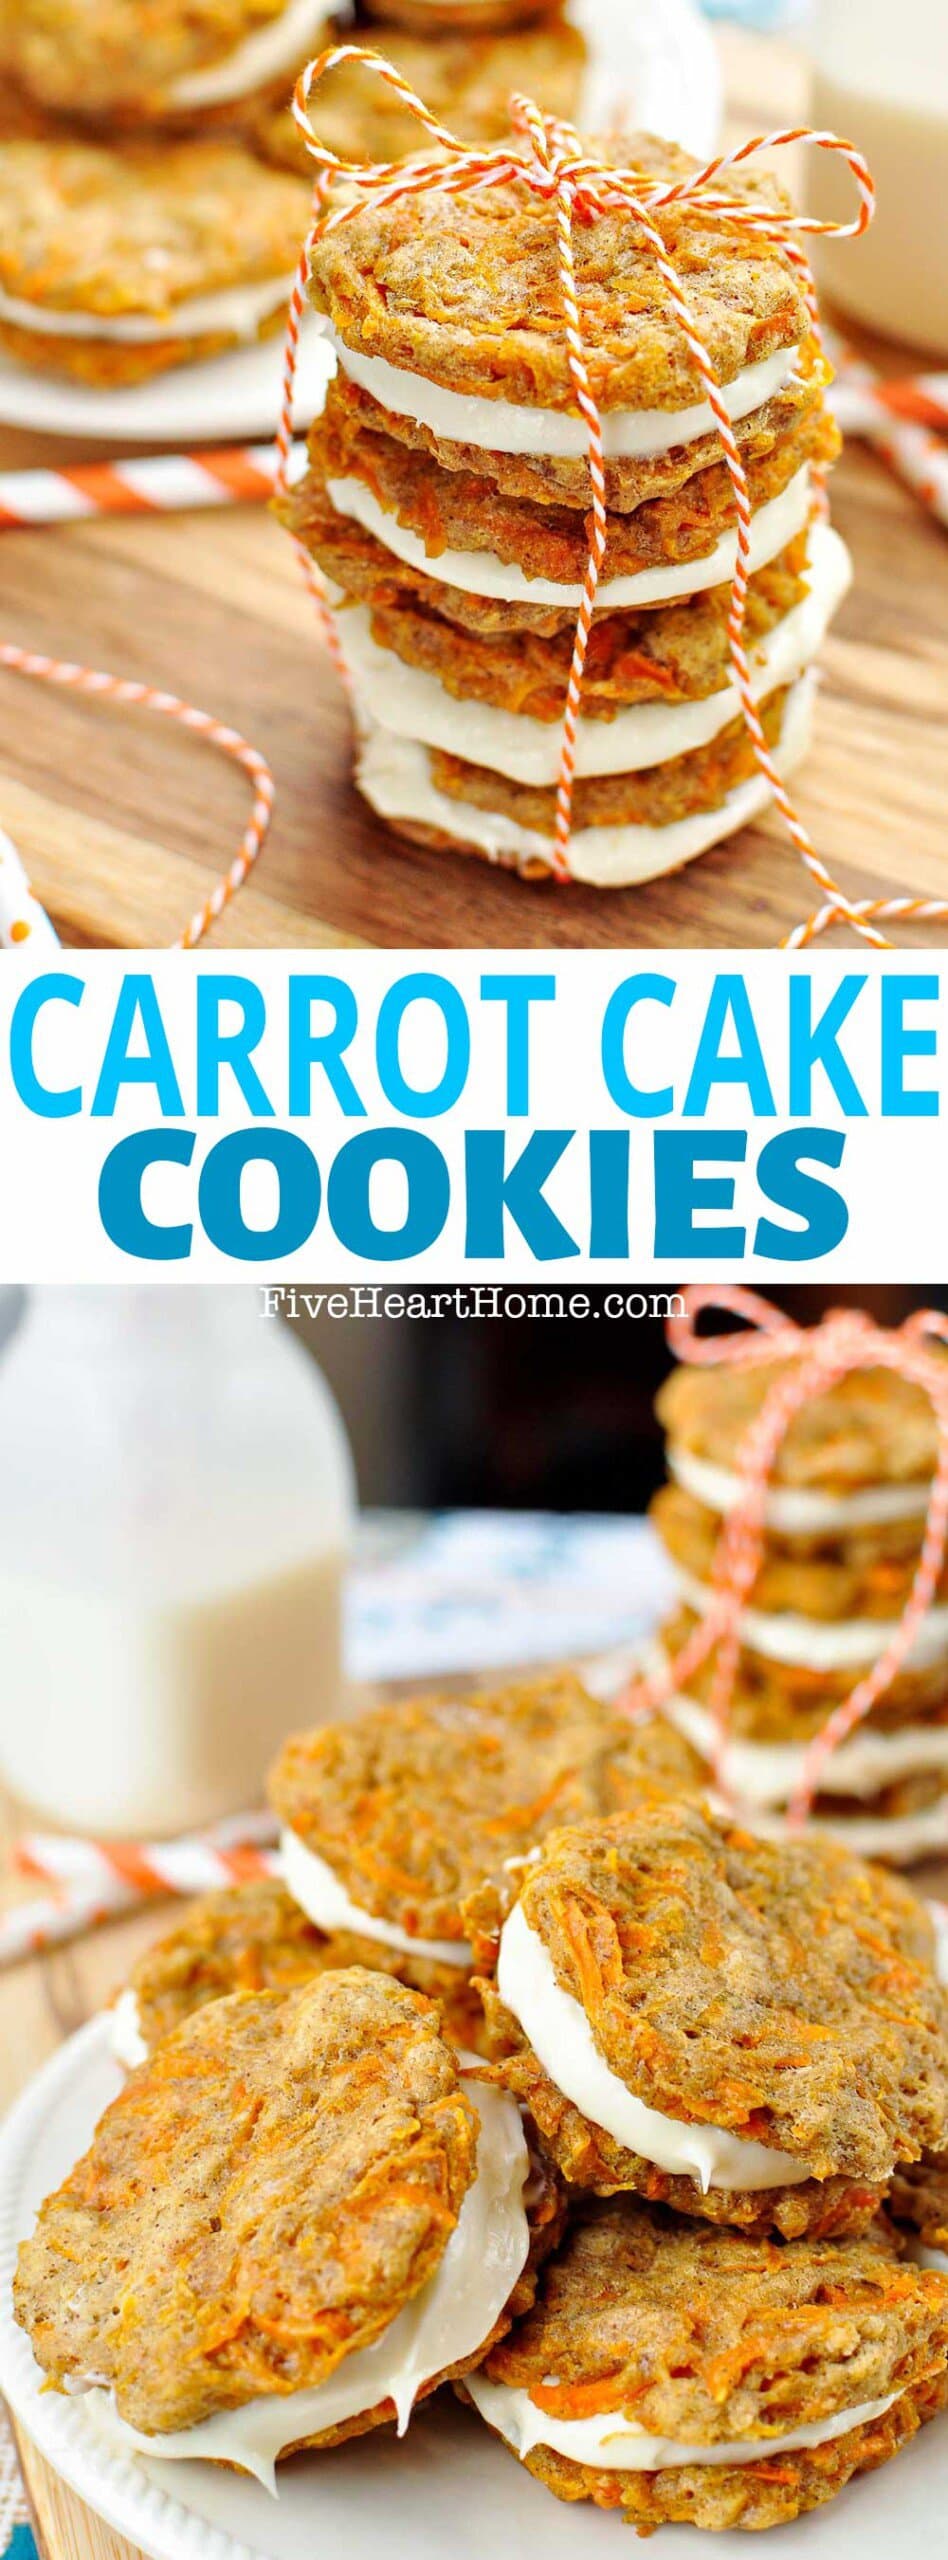 Carrot Cake Cookies ~ mini carrot cake sandwich cookies (like whoopie pies!) are filled with cream cheese frosting to make an easy, hand-held spring or Easter dessert! | FiveHeartHome.com via @fivehearthome